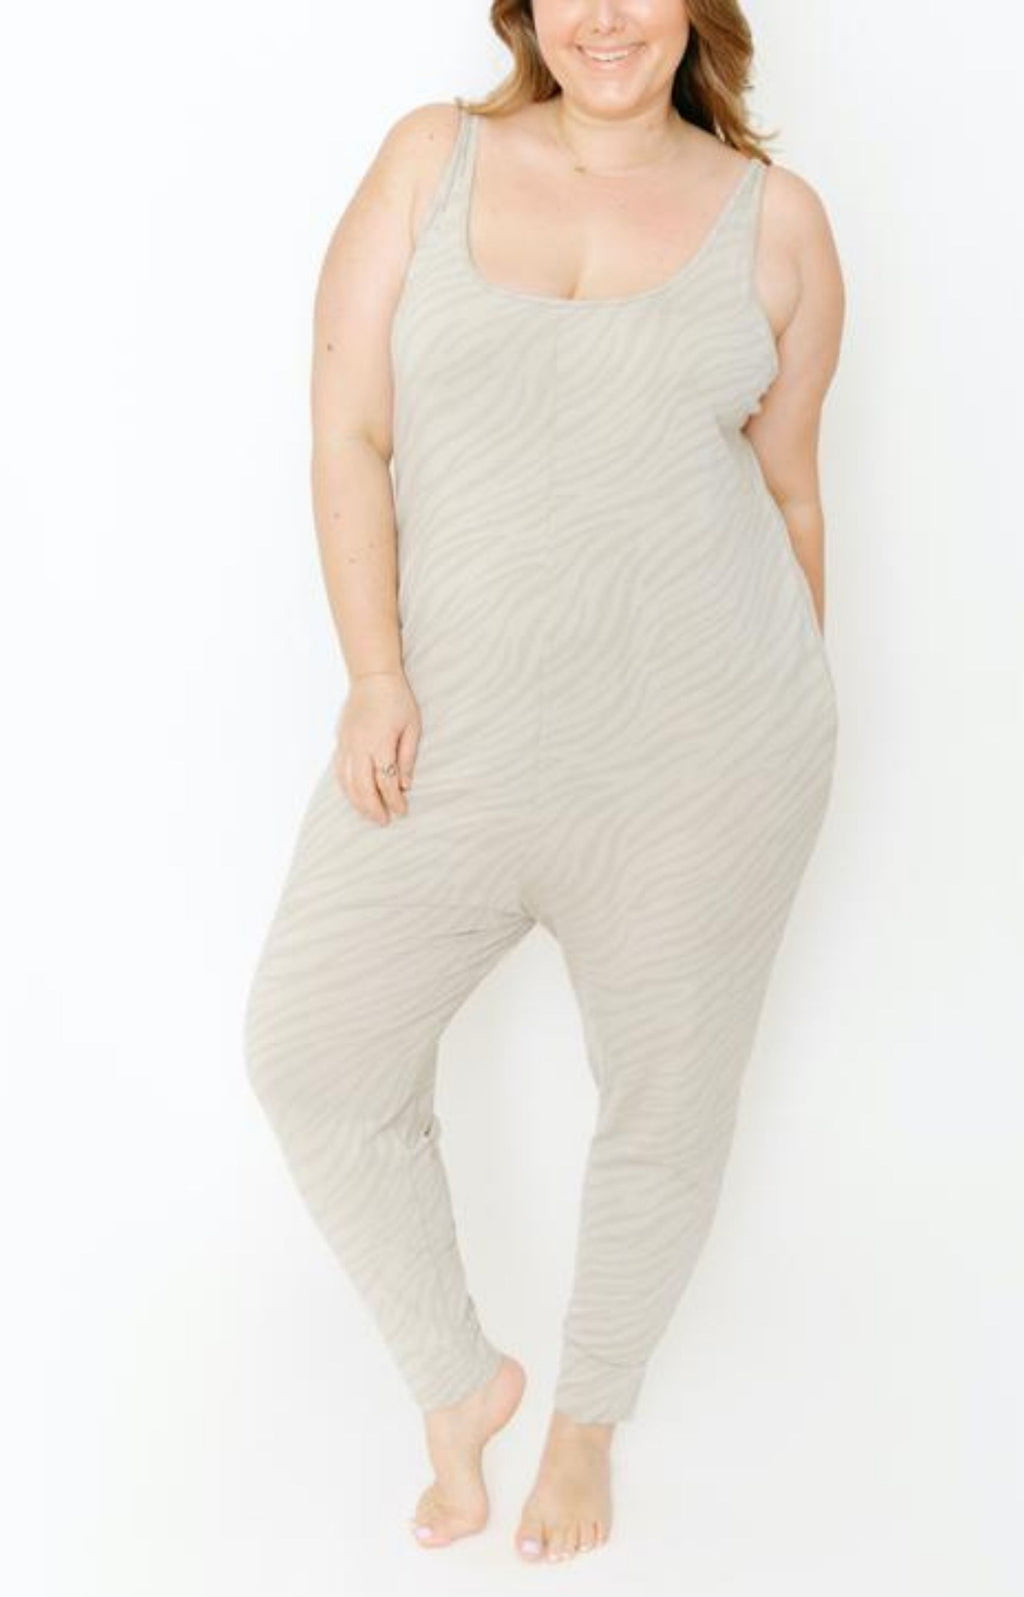 SmashTess Tuesday Romper - tan tiger  Women's sustainable and ethical clothing canada